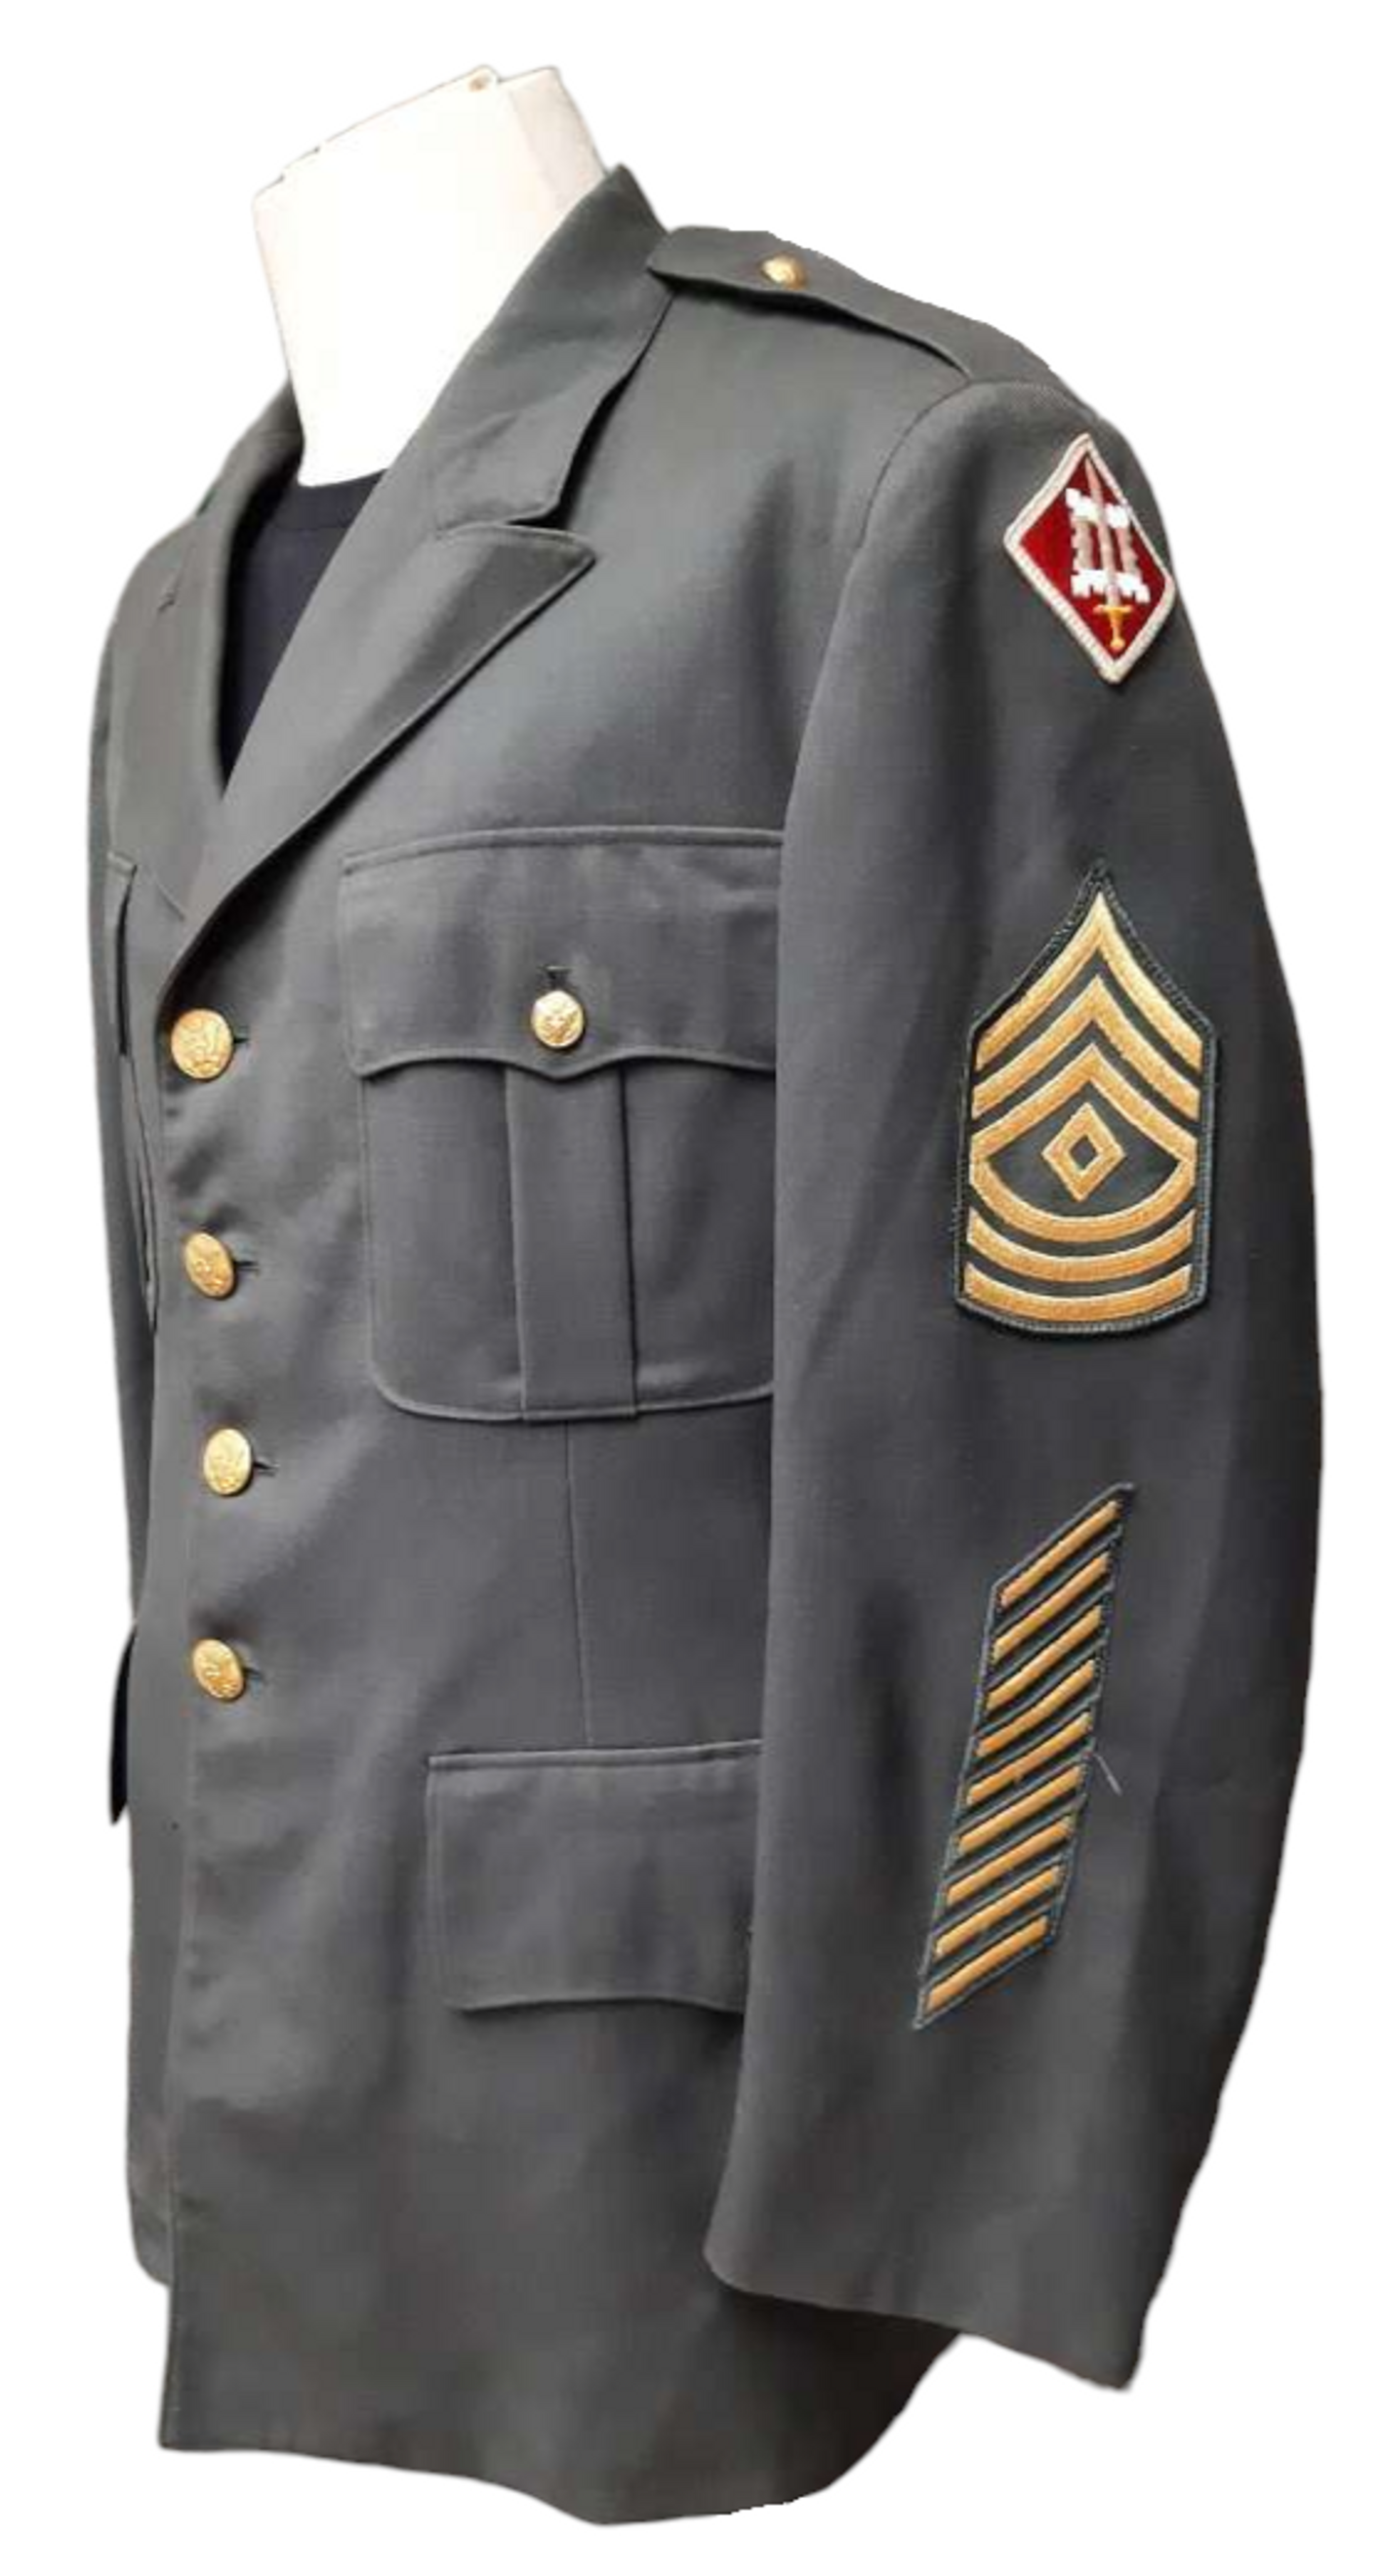 US Armed Forces Dress Green Jacket - 100% Wool